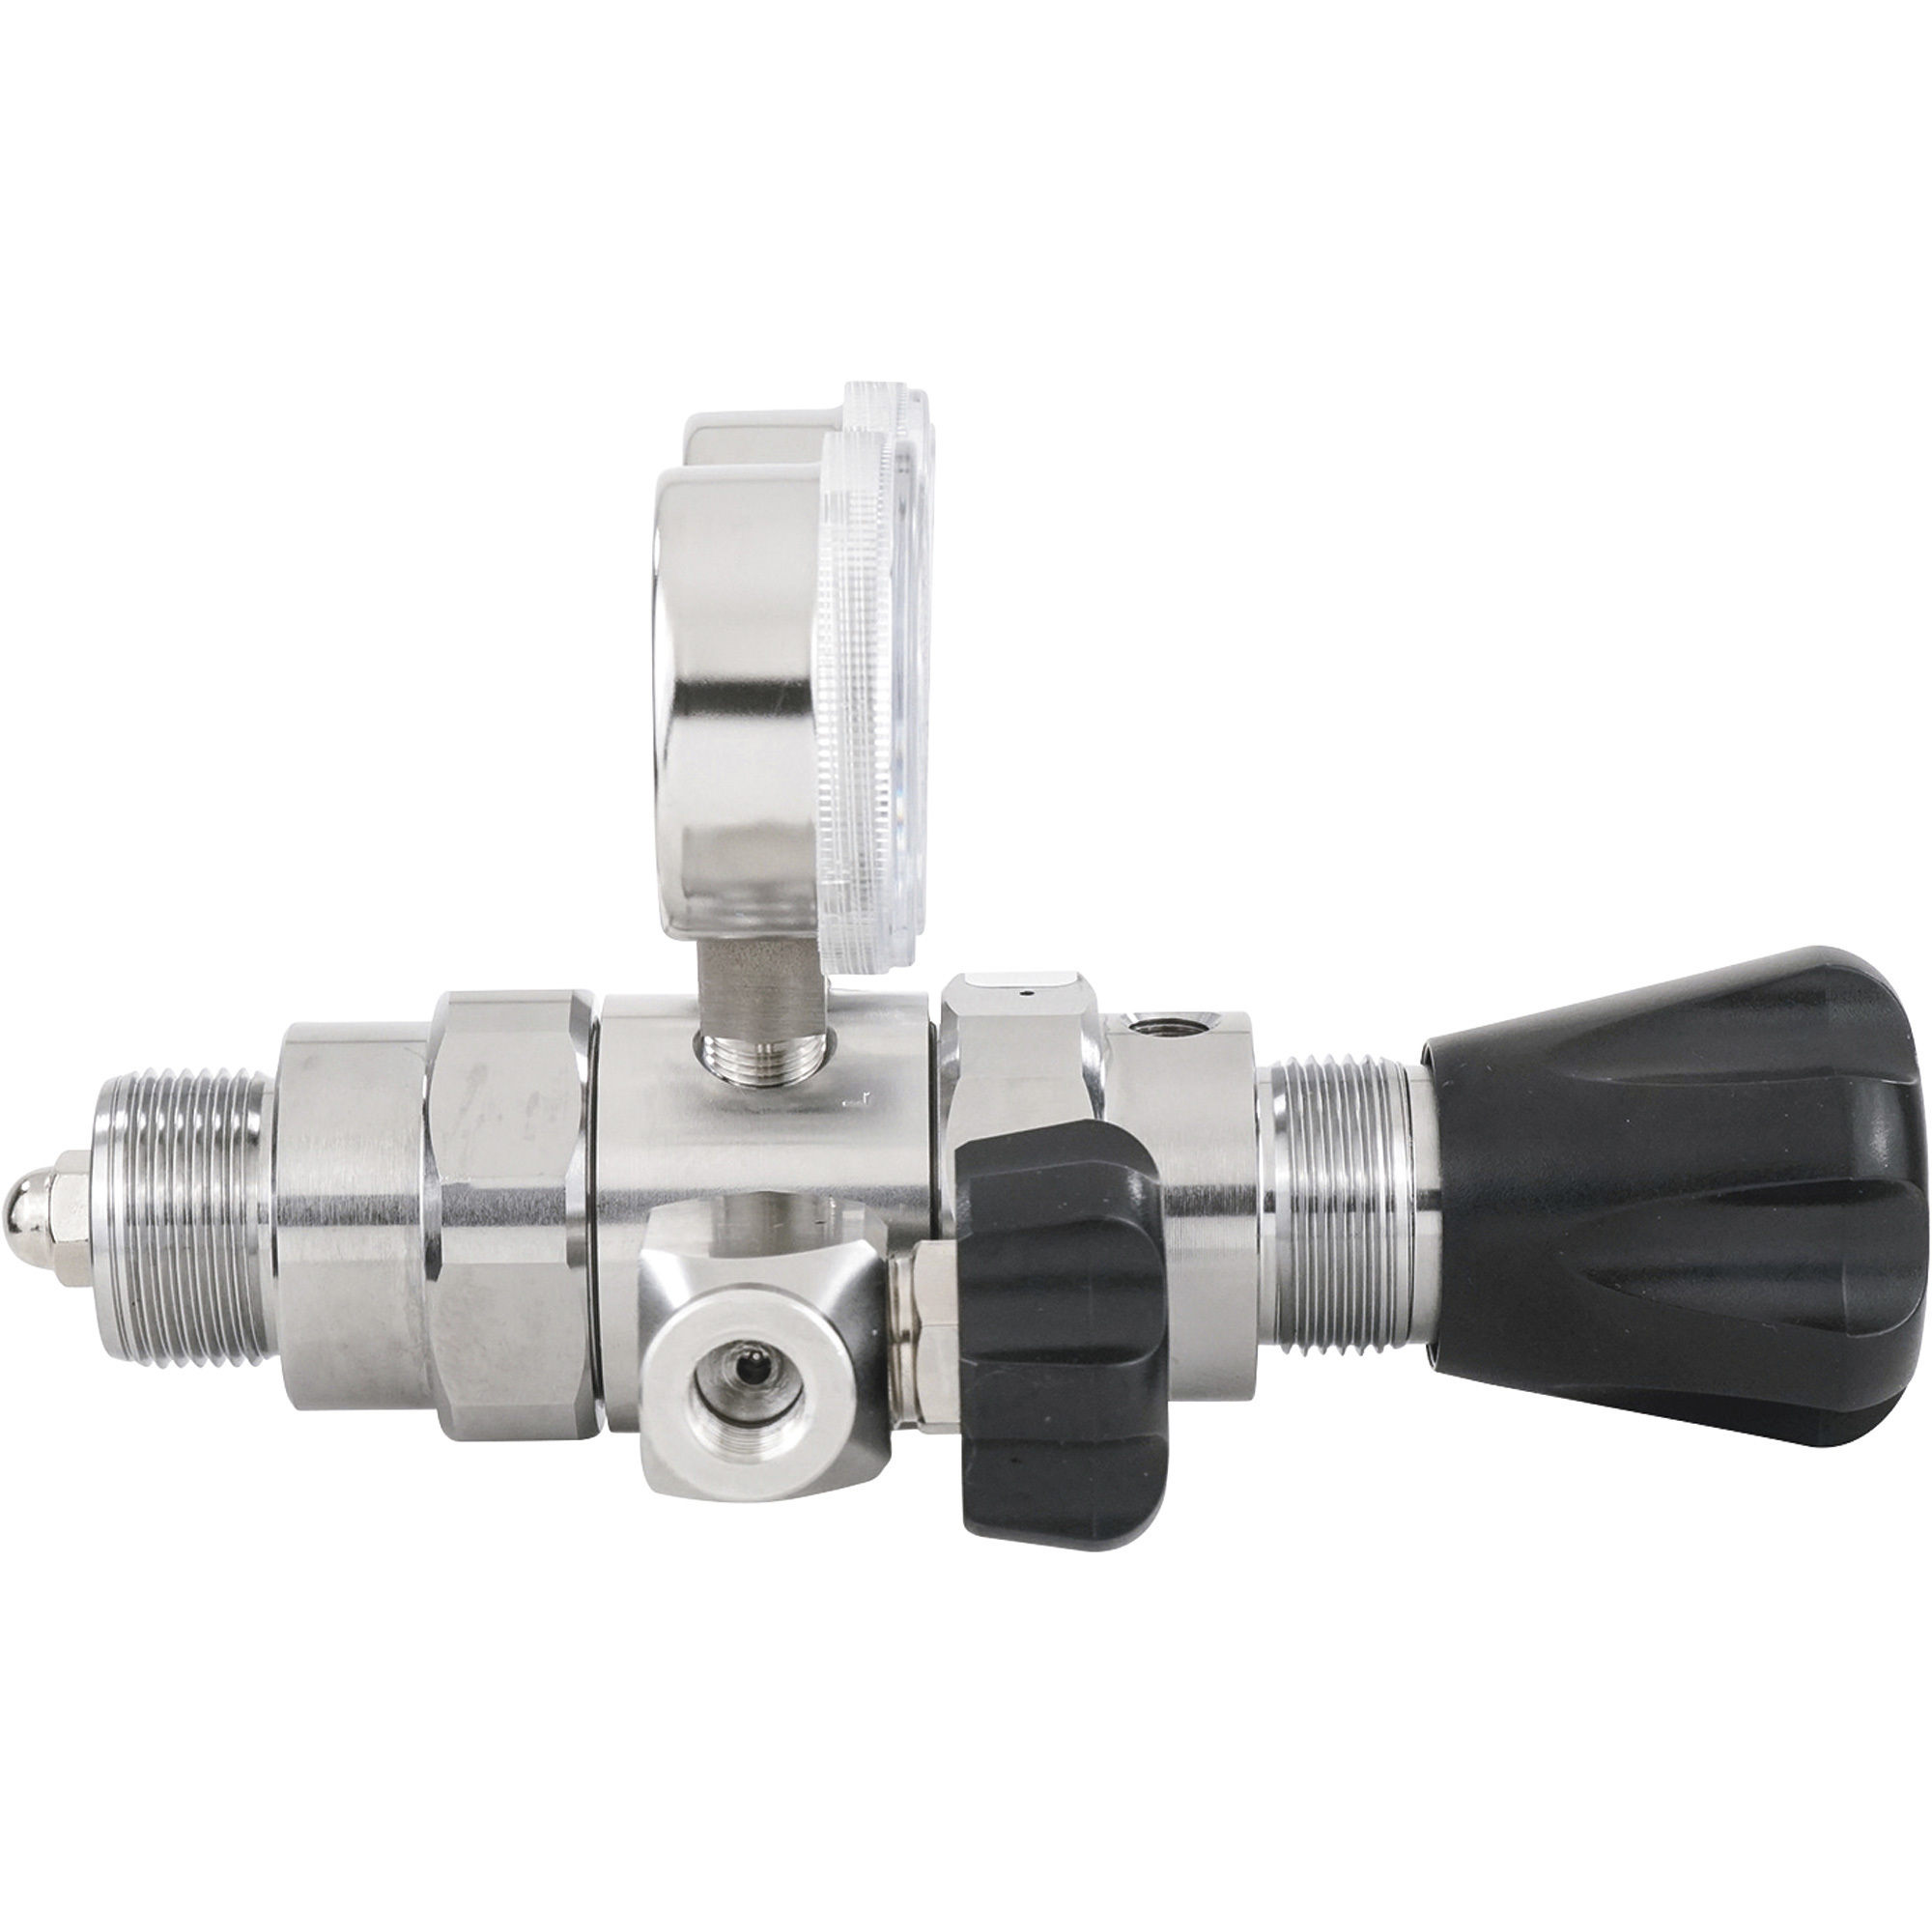 Harris Hydrogen and Flammable Specialty Gas Lab Regulator — CGA 350,  Two-Stage, 316 Stainless Steel, 0–50 PSI, Model# HP742-050-350-A Northern  Tool